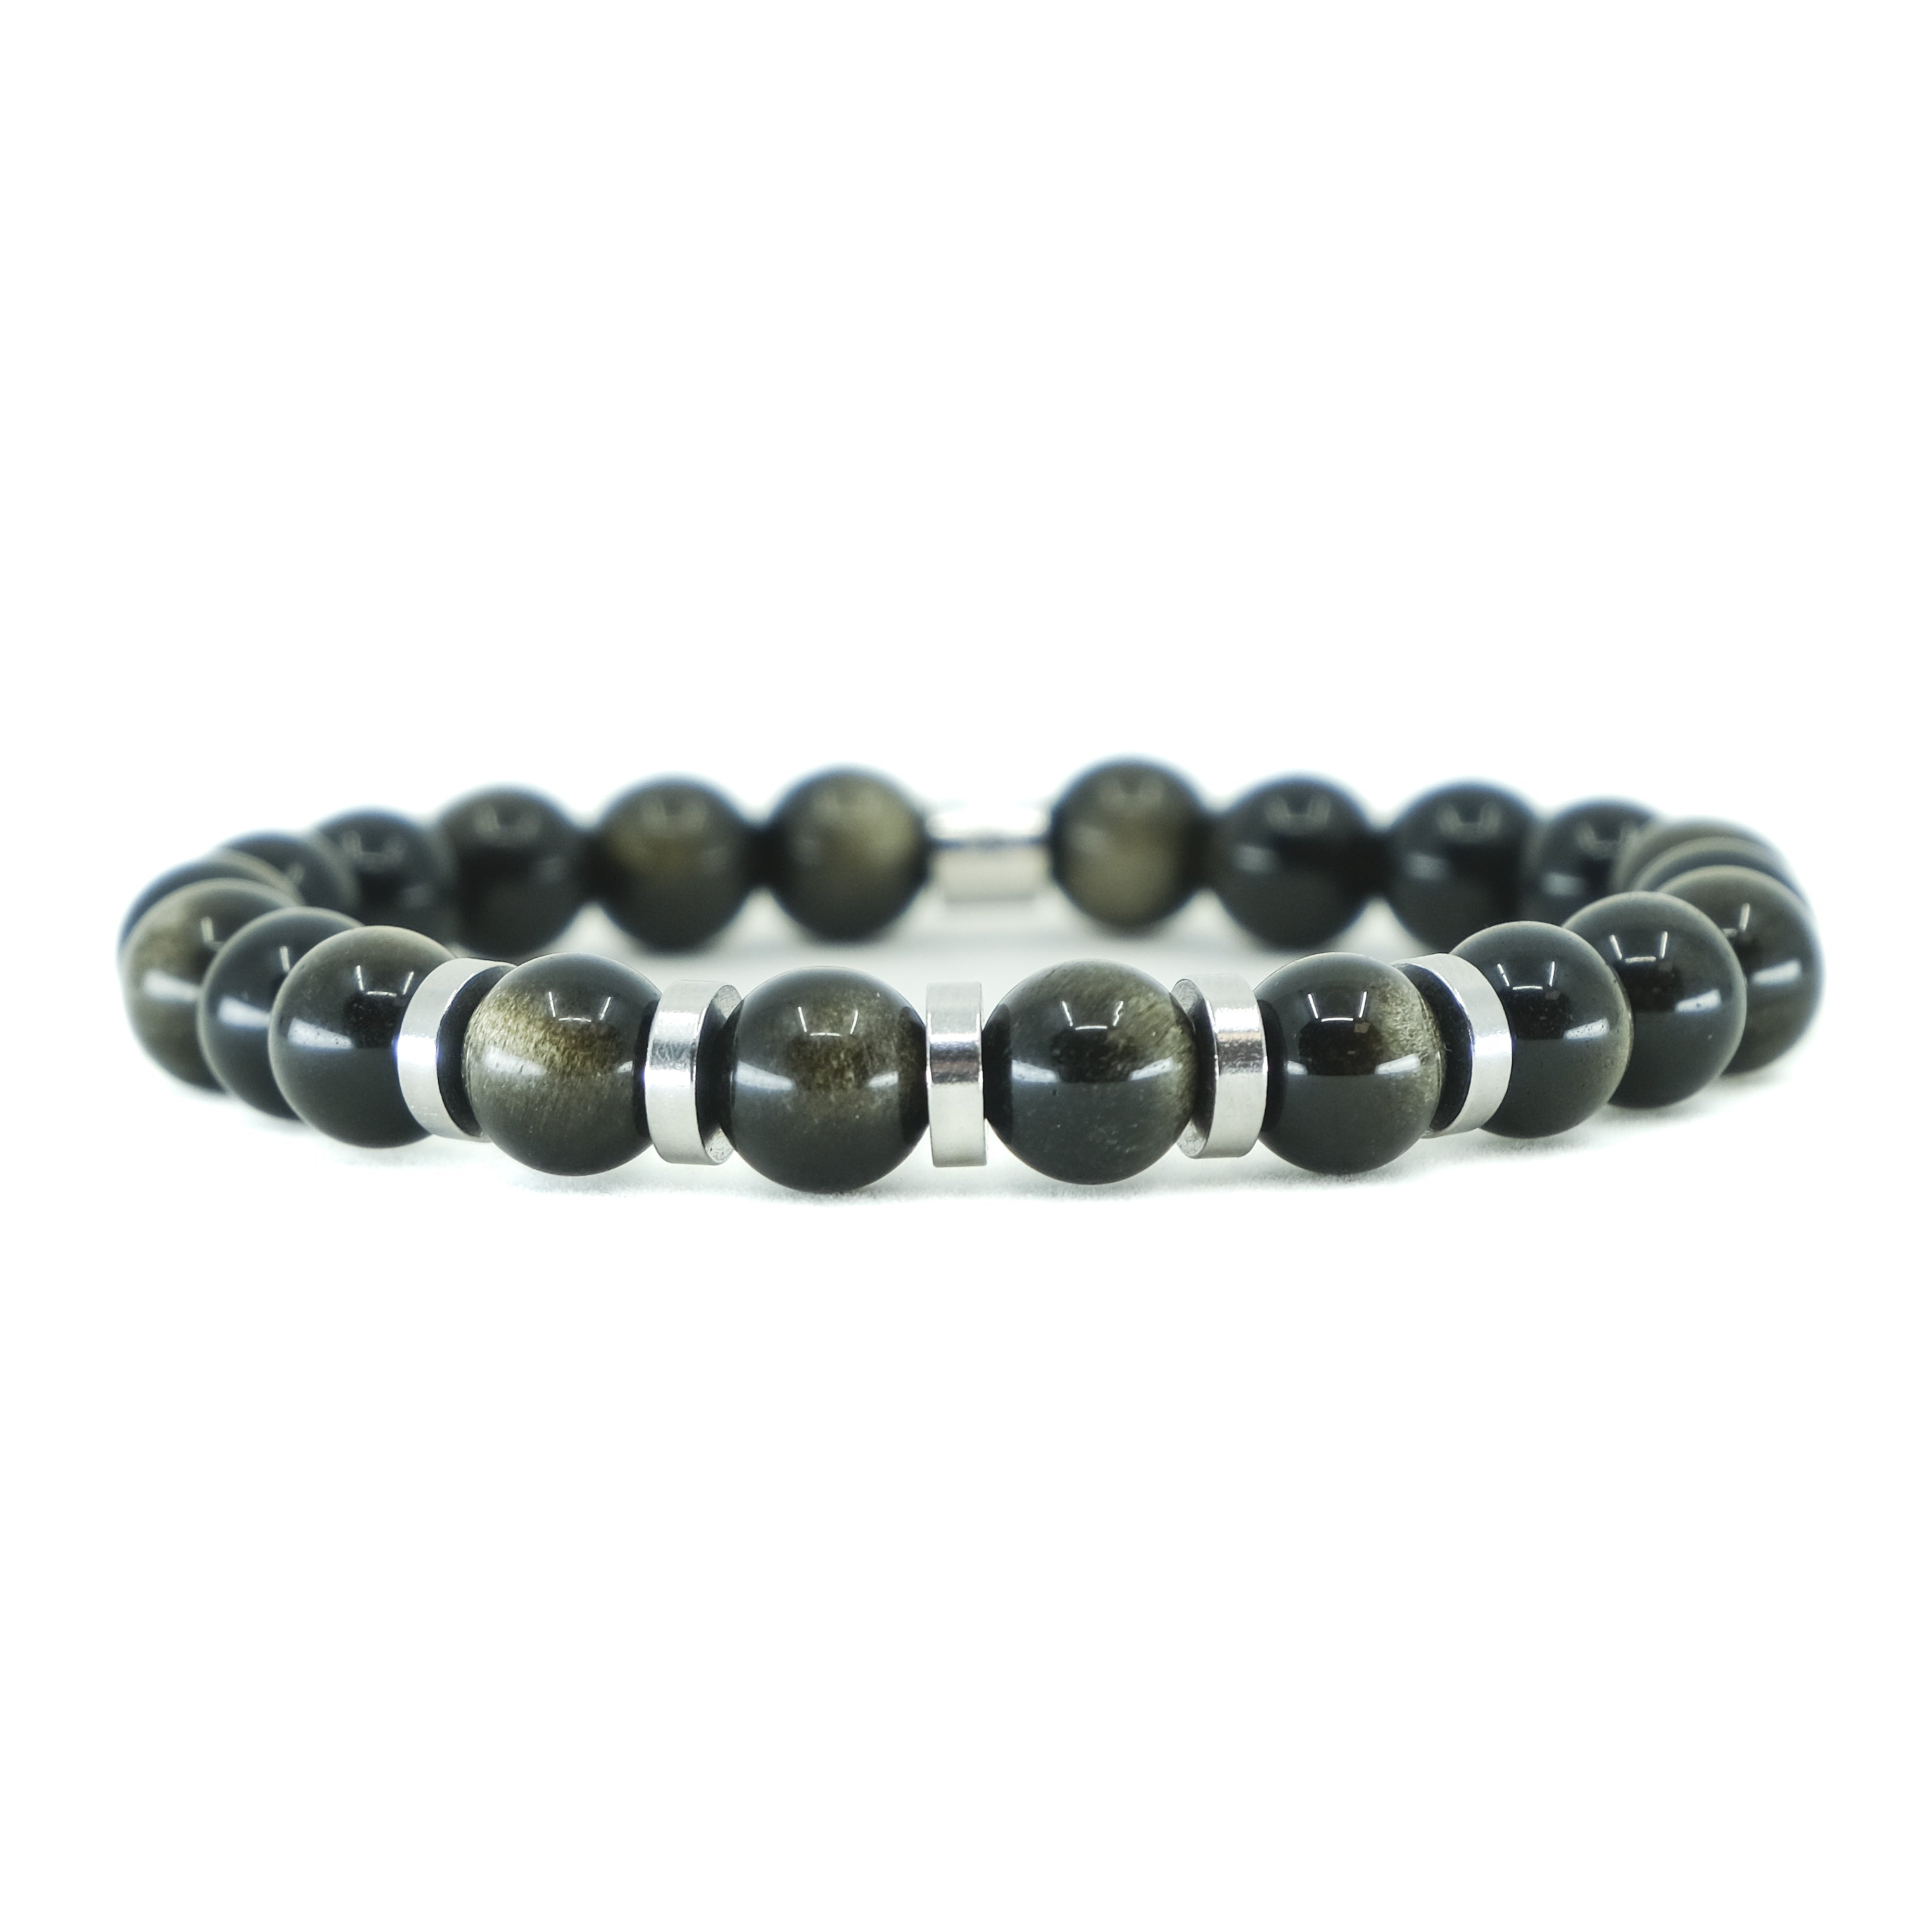 A golden obsidian gemstone bracelet with stainless steel accessories